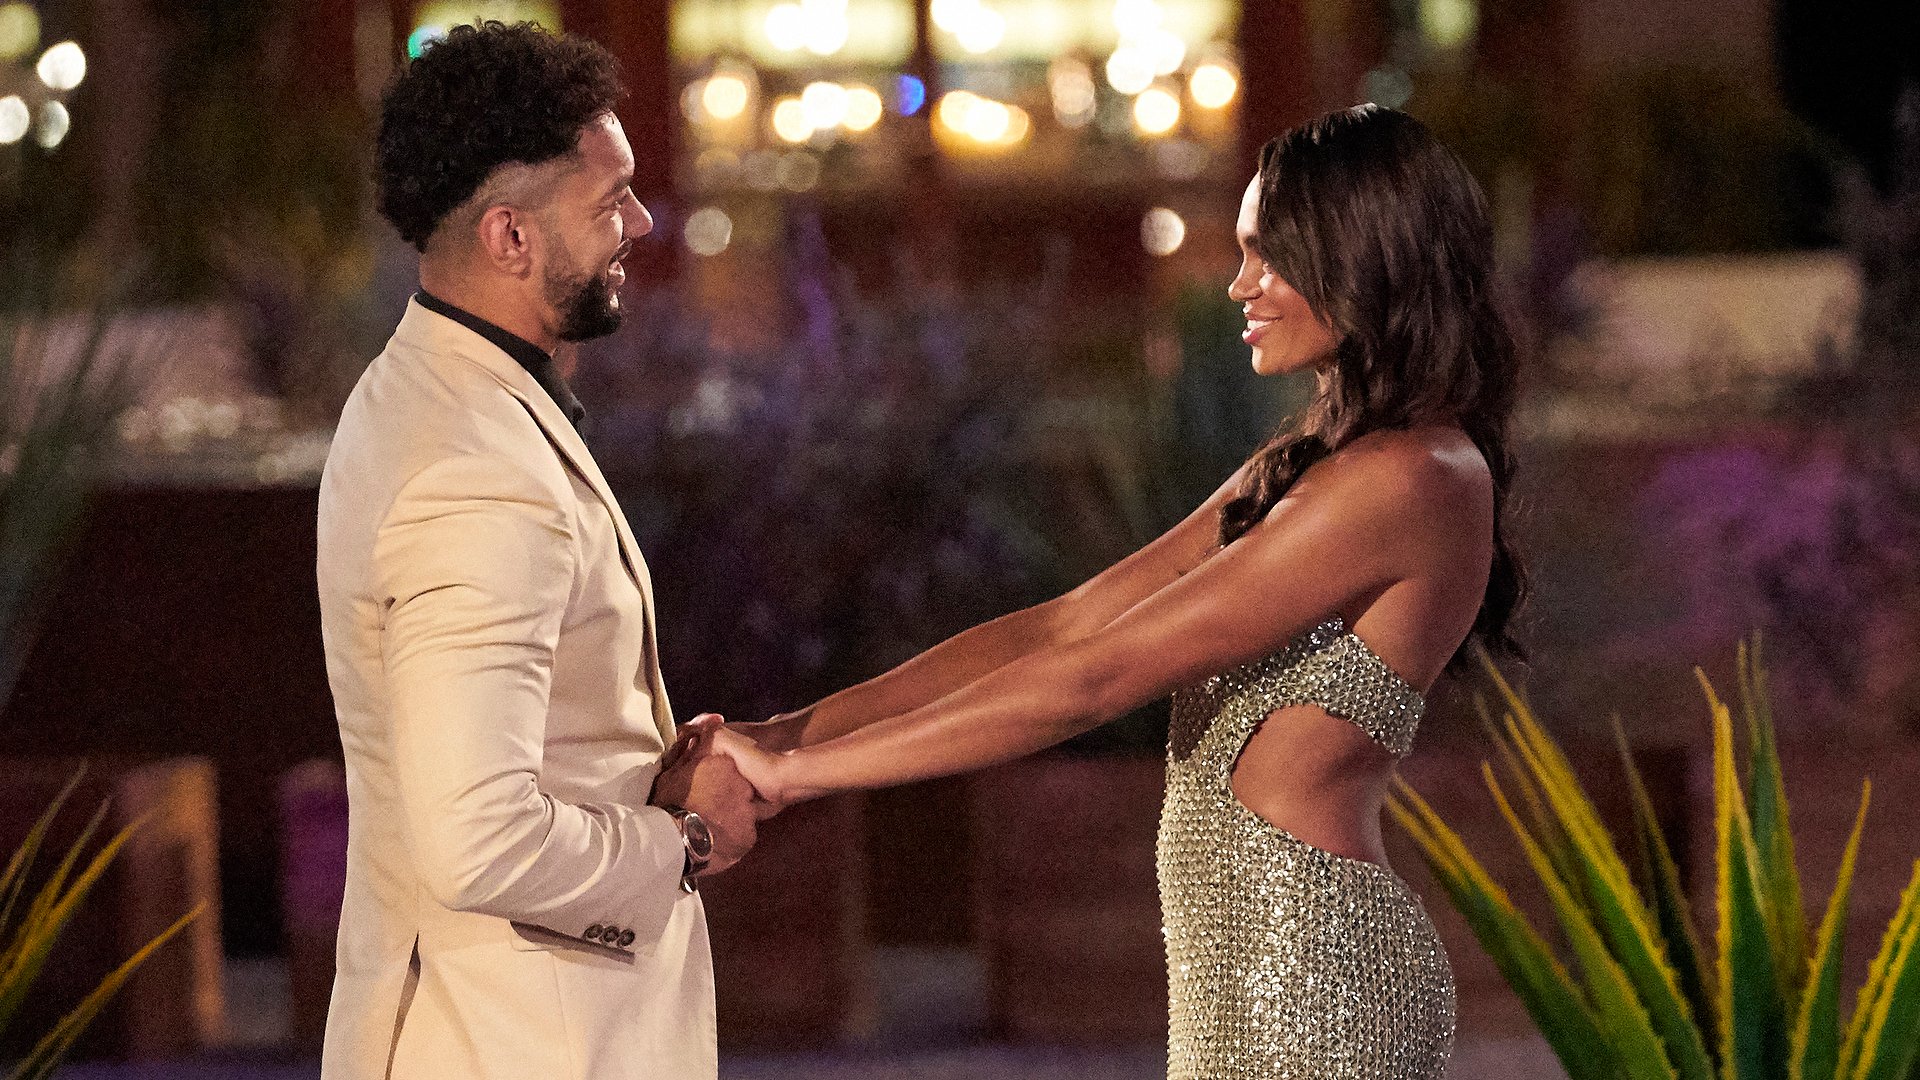 Jamie Skaar and Michelle Young holding hands together in ‘The Bachelorette’ Season 18 premiere